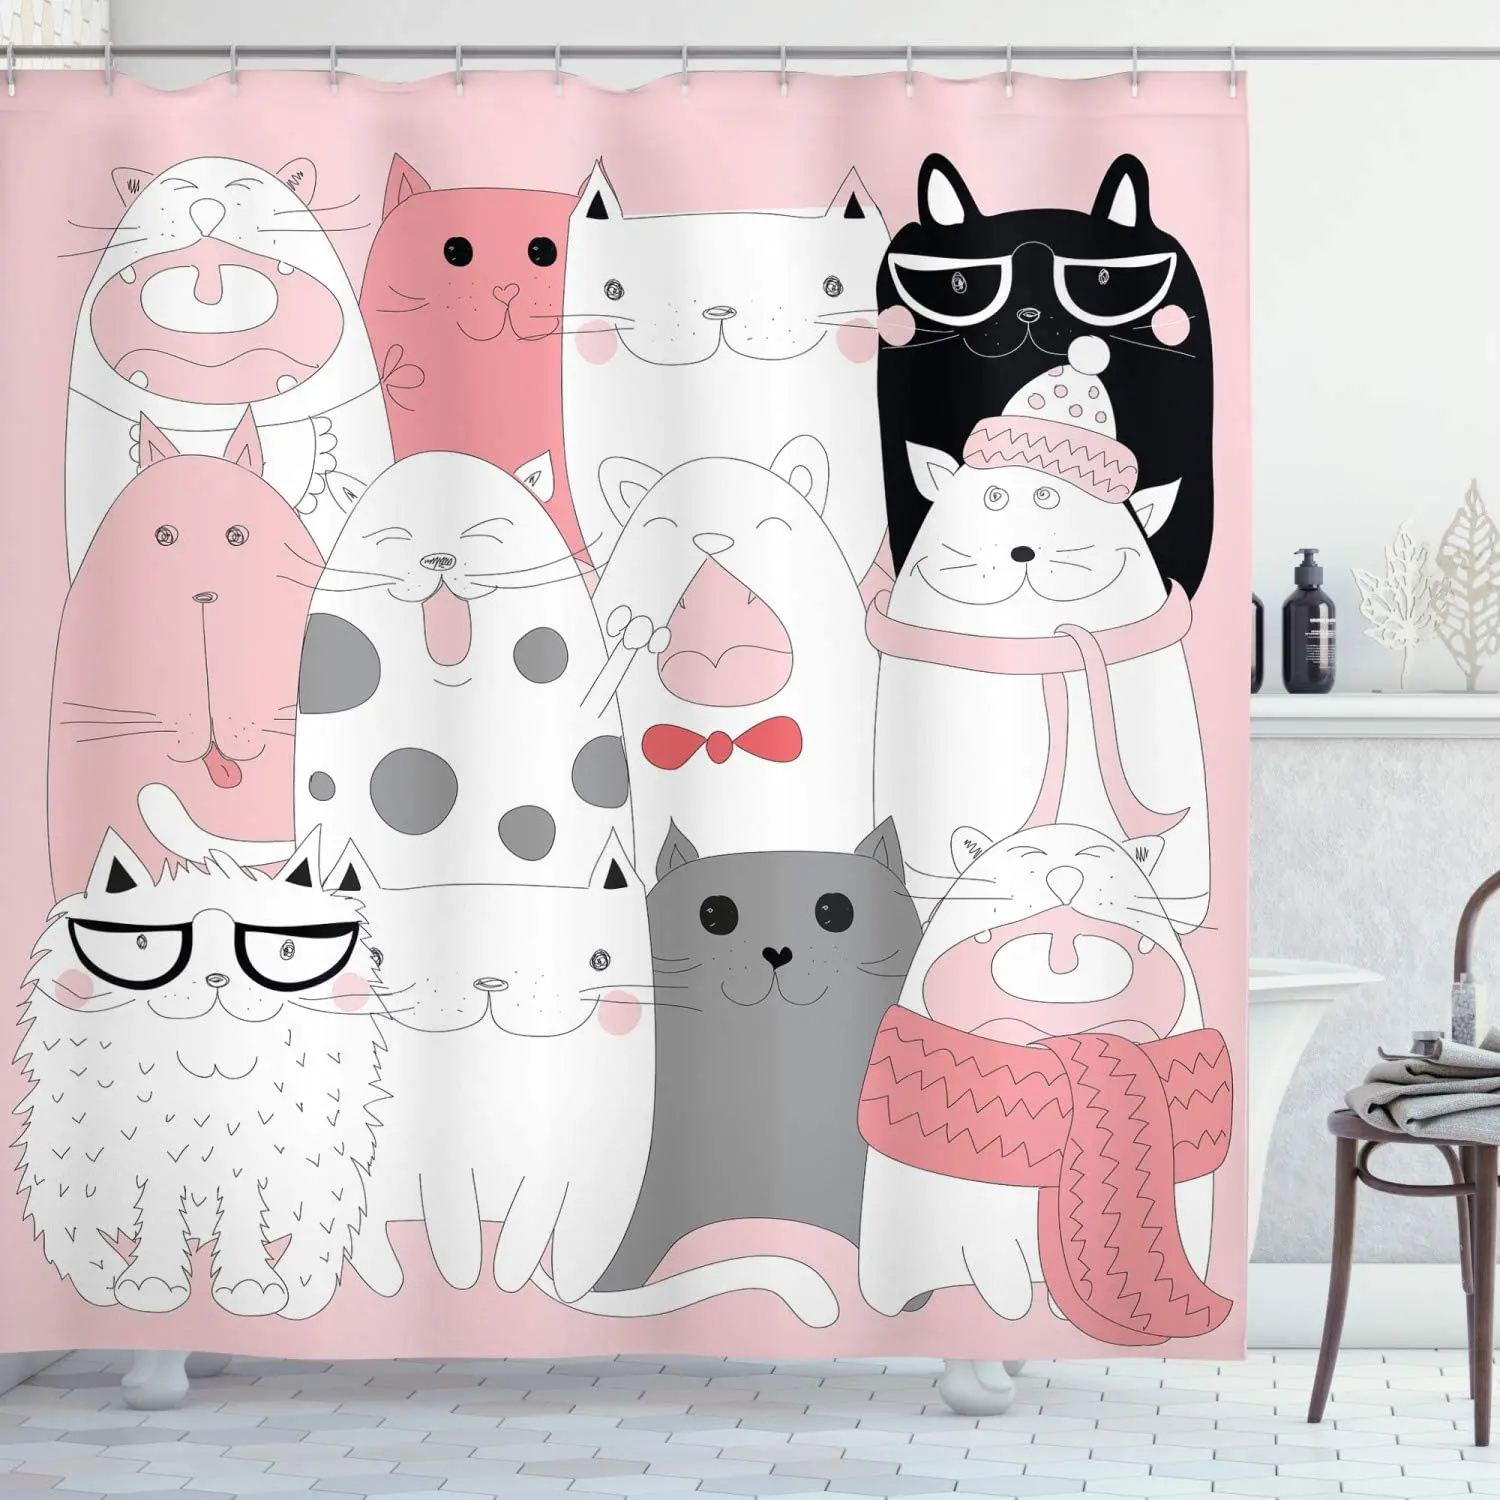 

Cat Shower Curtains Cartoon Kittens Funny Smiling Glasses Scarfs Doodle Humorous Design Fabric Bathroom Decor Set with Hooks